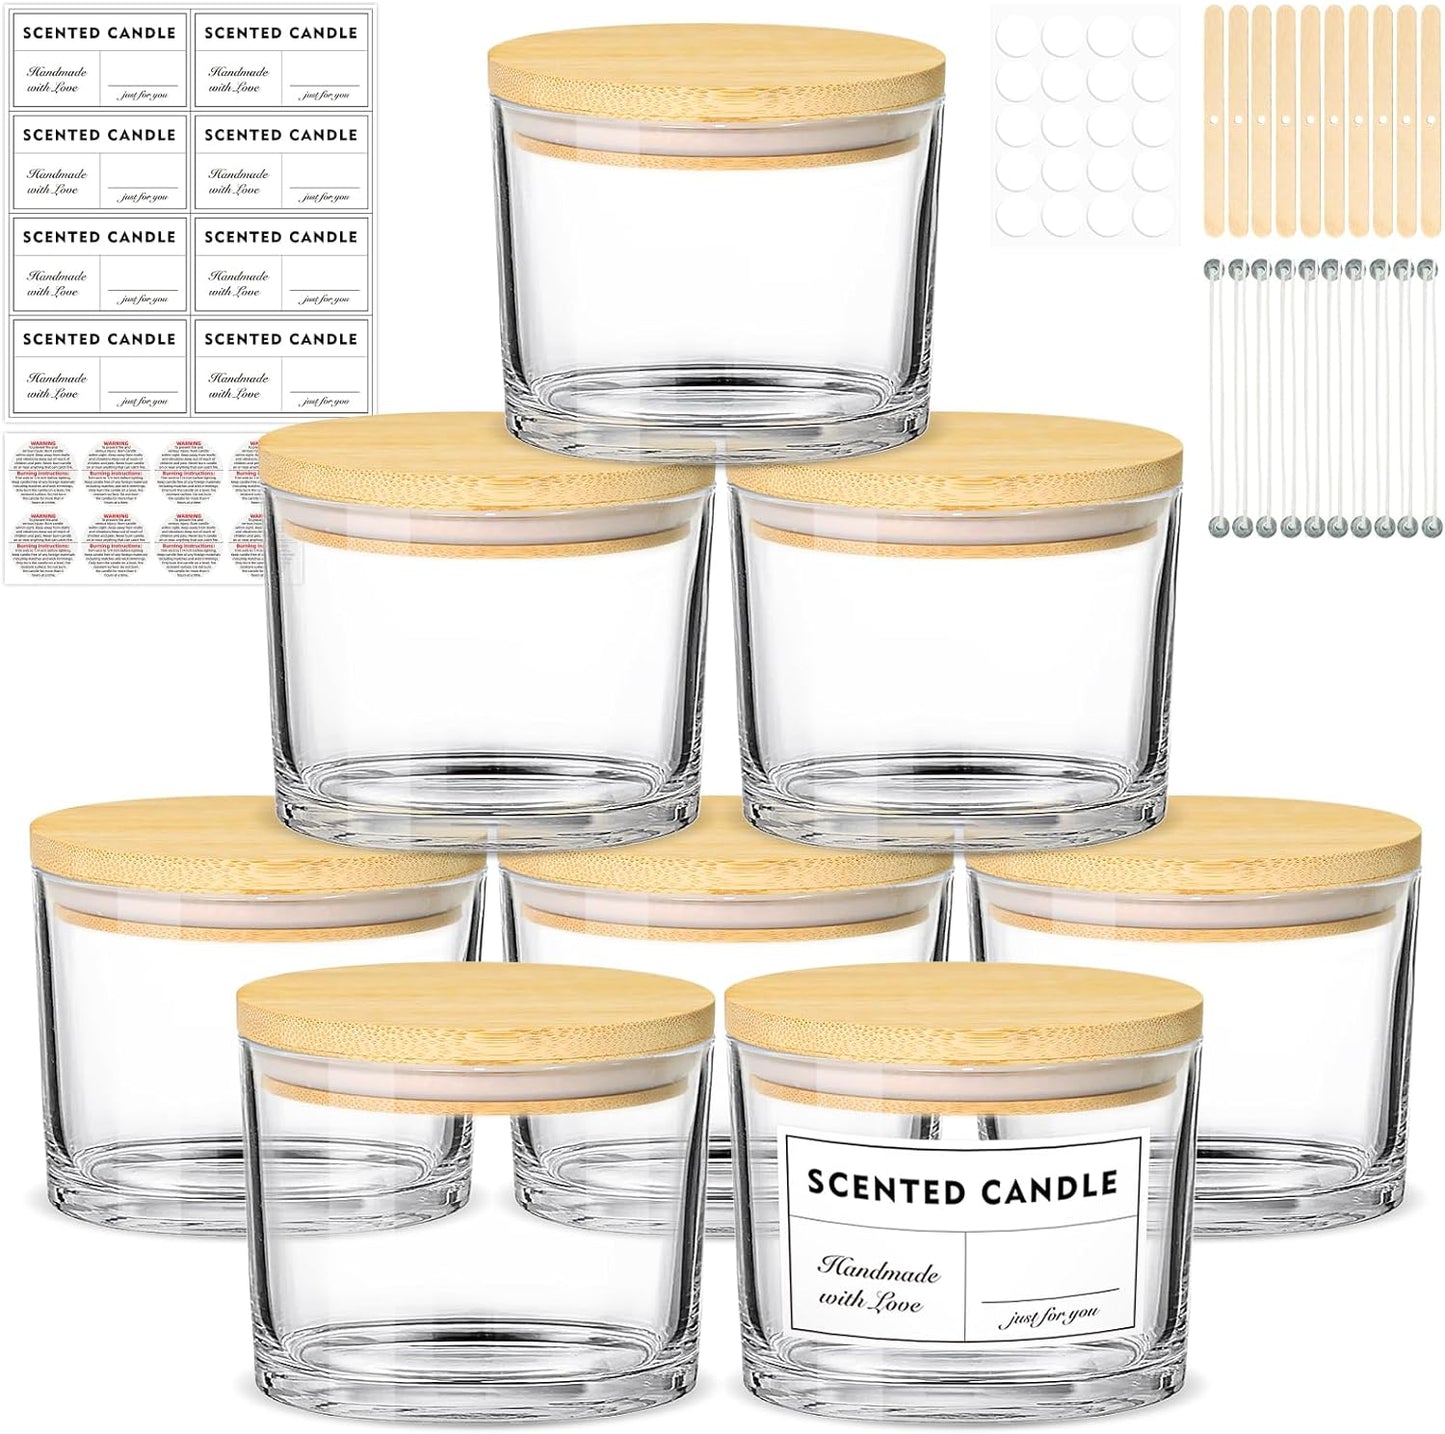 16Oz Candle Jars 6 Pack - 3 Wick Large Empty Clear Glass Candle Making Jars with Bamboo Lids, with Stickers and Labels, Bulk Candle Jars for Making Candles Containers - Dishwasher Safe